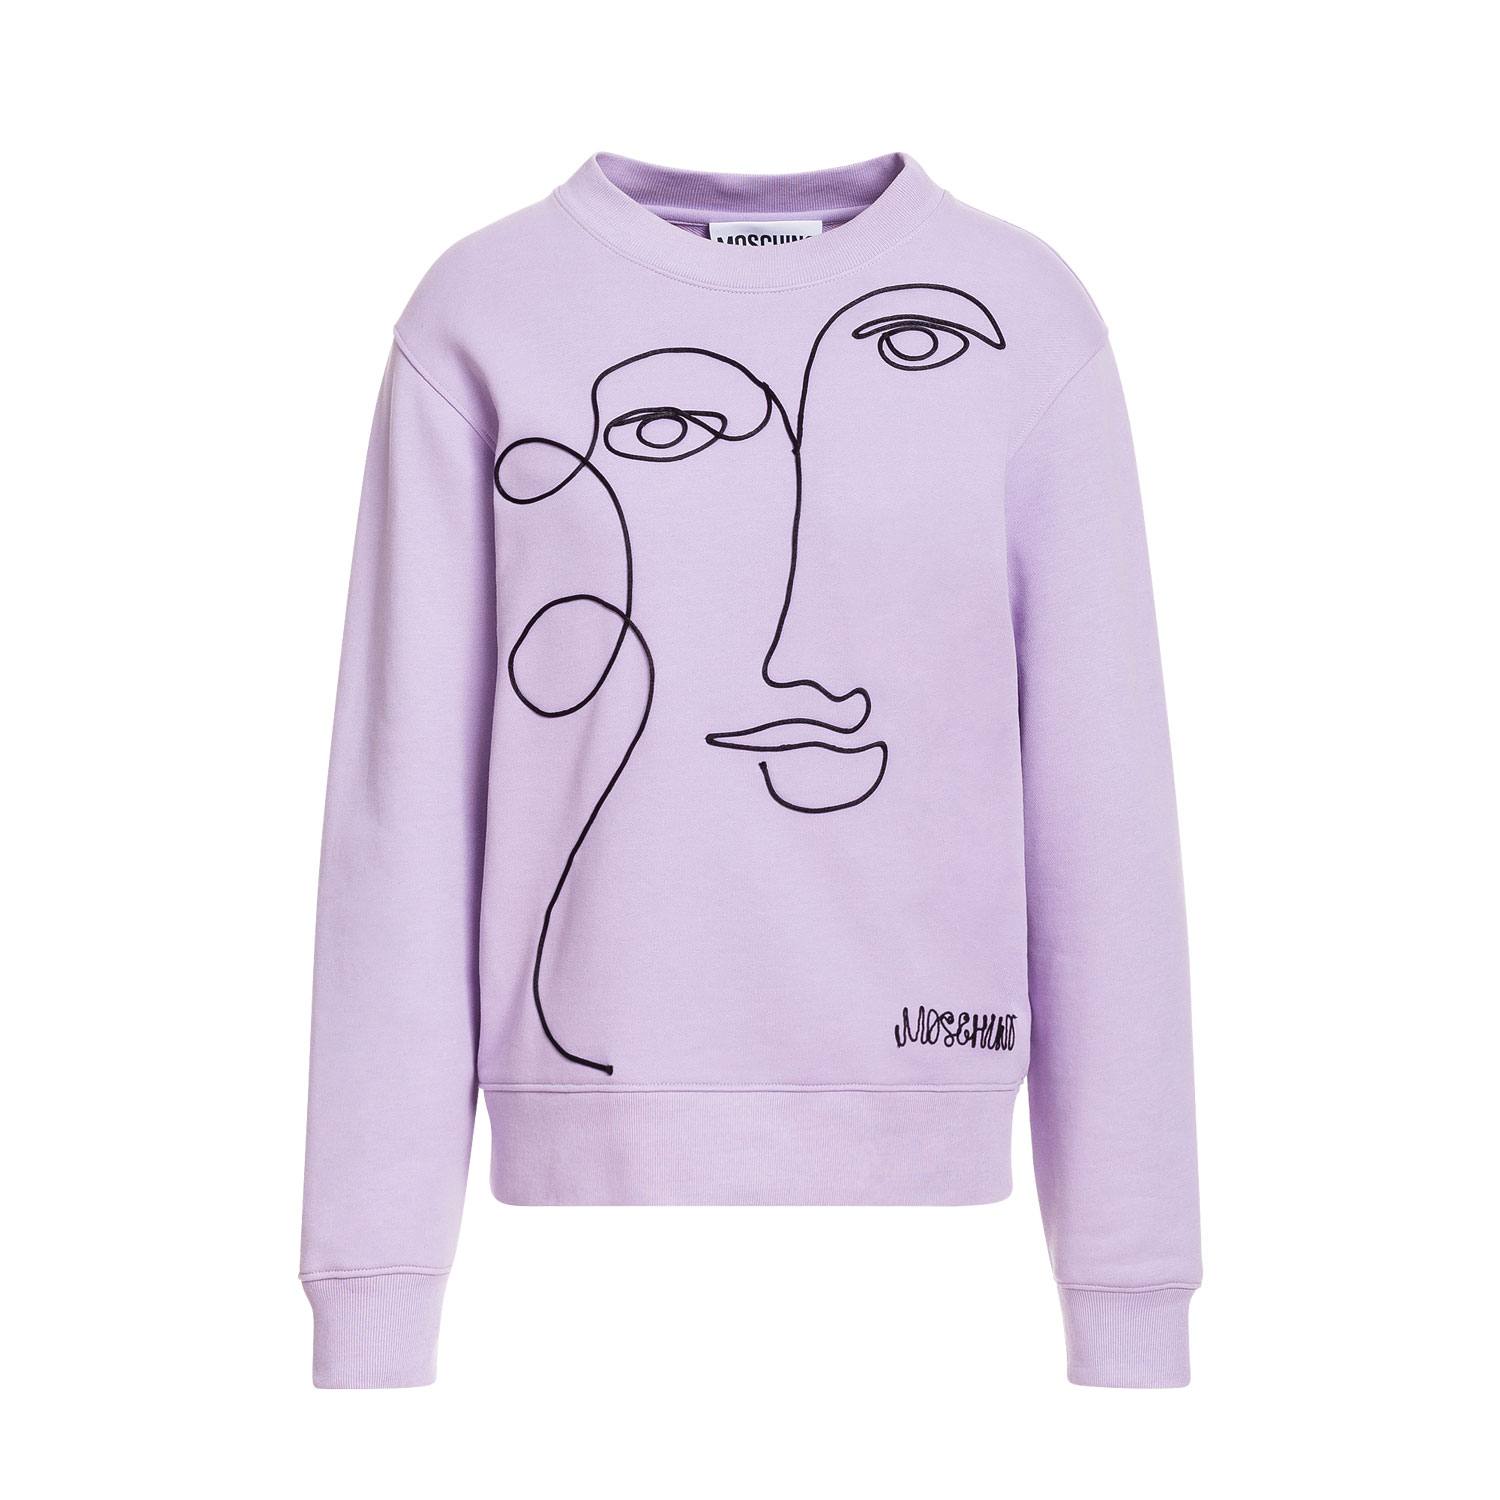 Moschino’s Picasso-inspired cotton sweatshirt with Cornely embroidery.